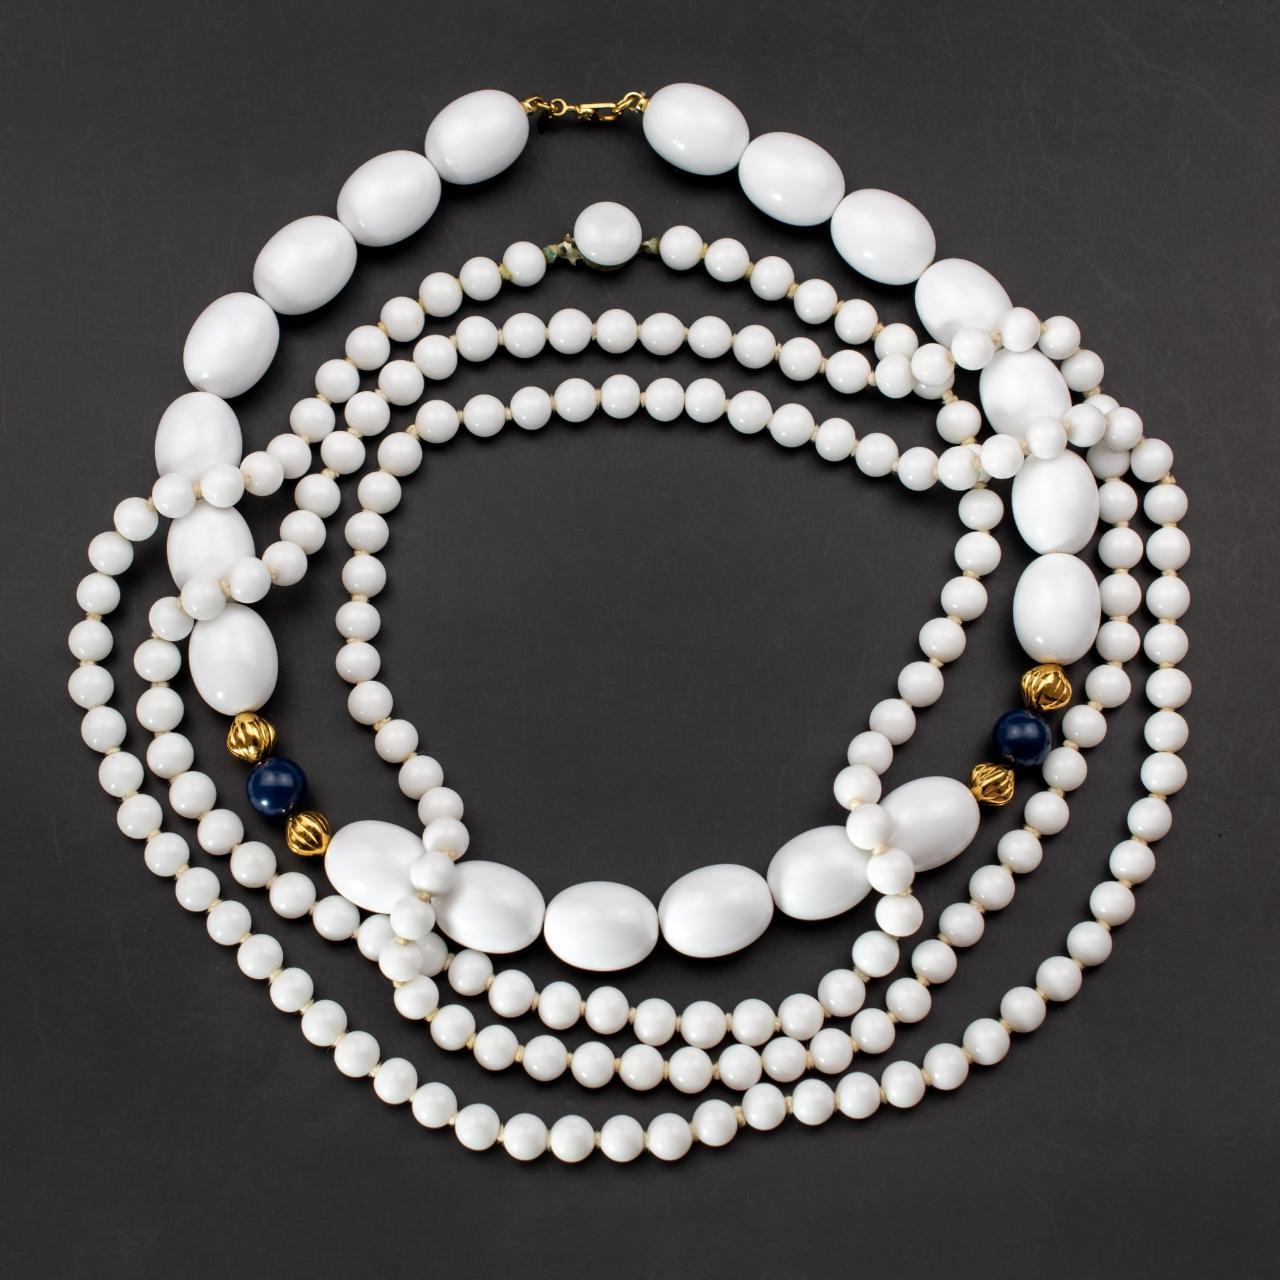 Vintage Milk Glass Beaded Choker, Elegant White Minimalist Necklace,  Knotted Strand with Rondelle Crystal Channel Bead Spacers